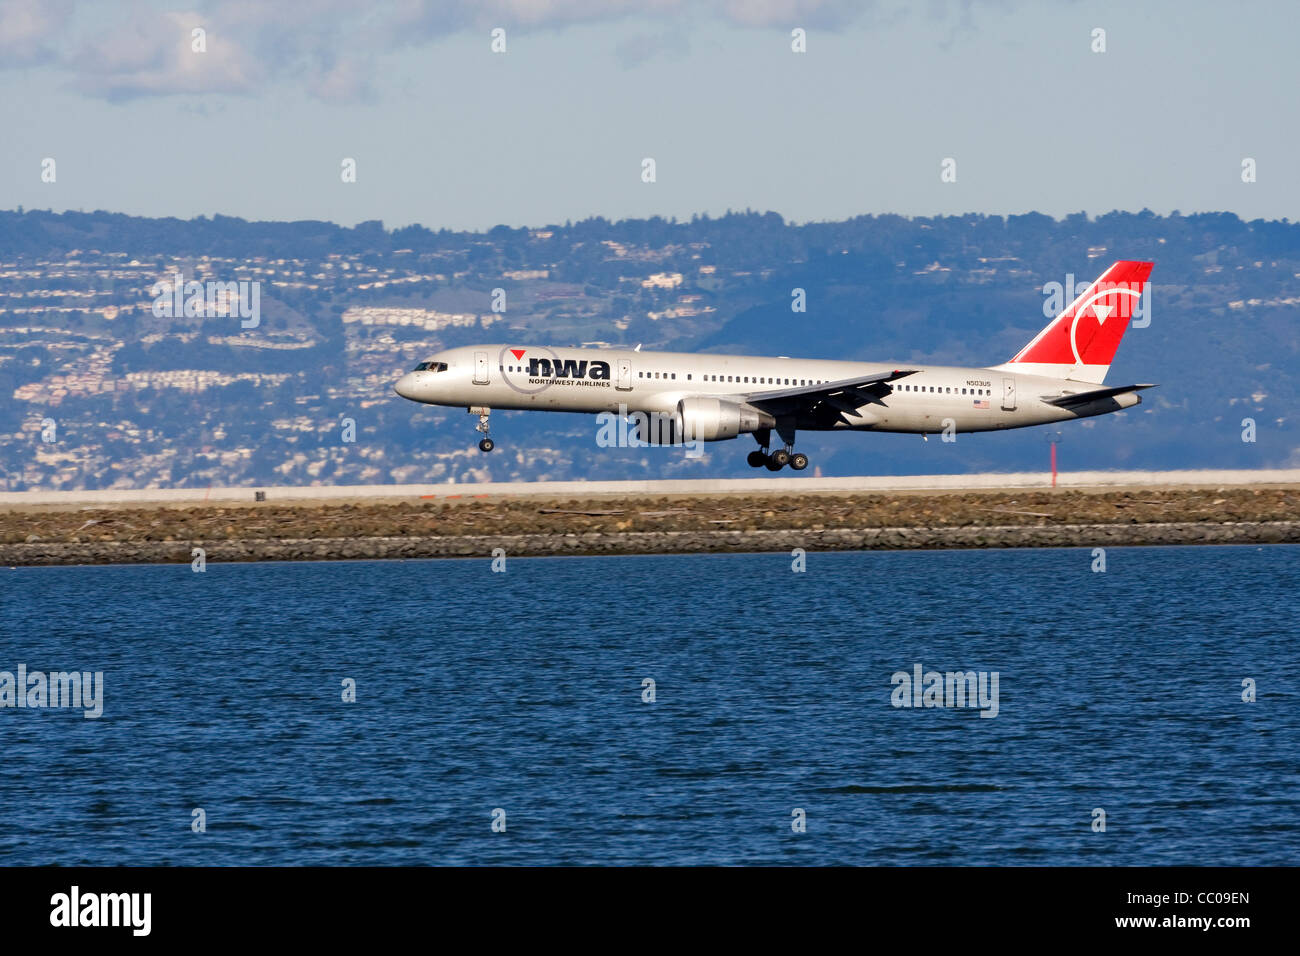 A commercial airplane lands at San Francisco International Airport in California. Stock Photo